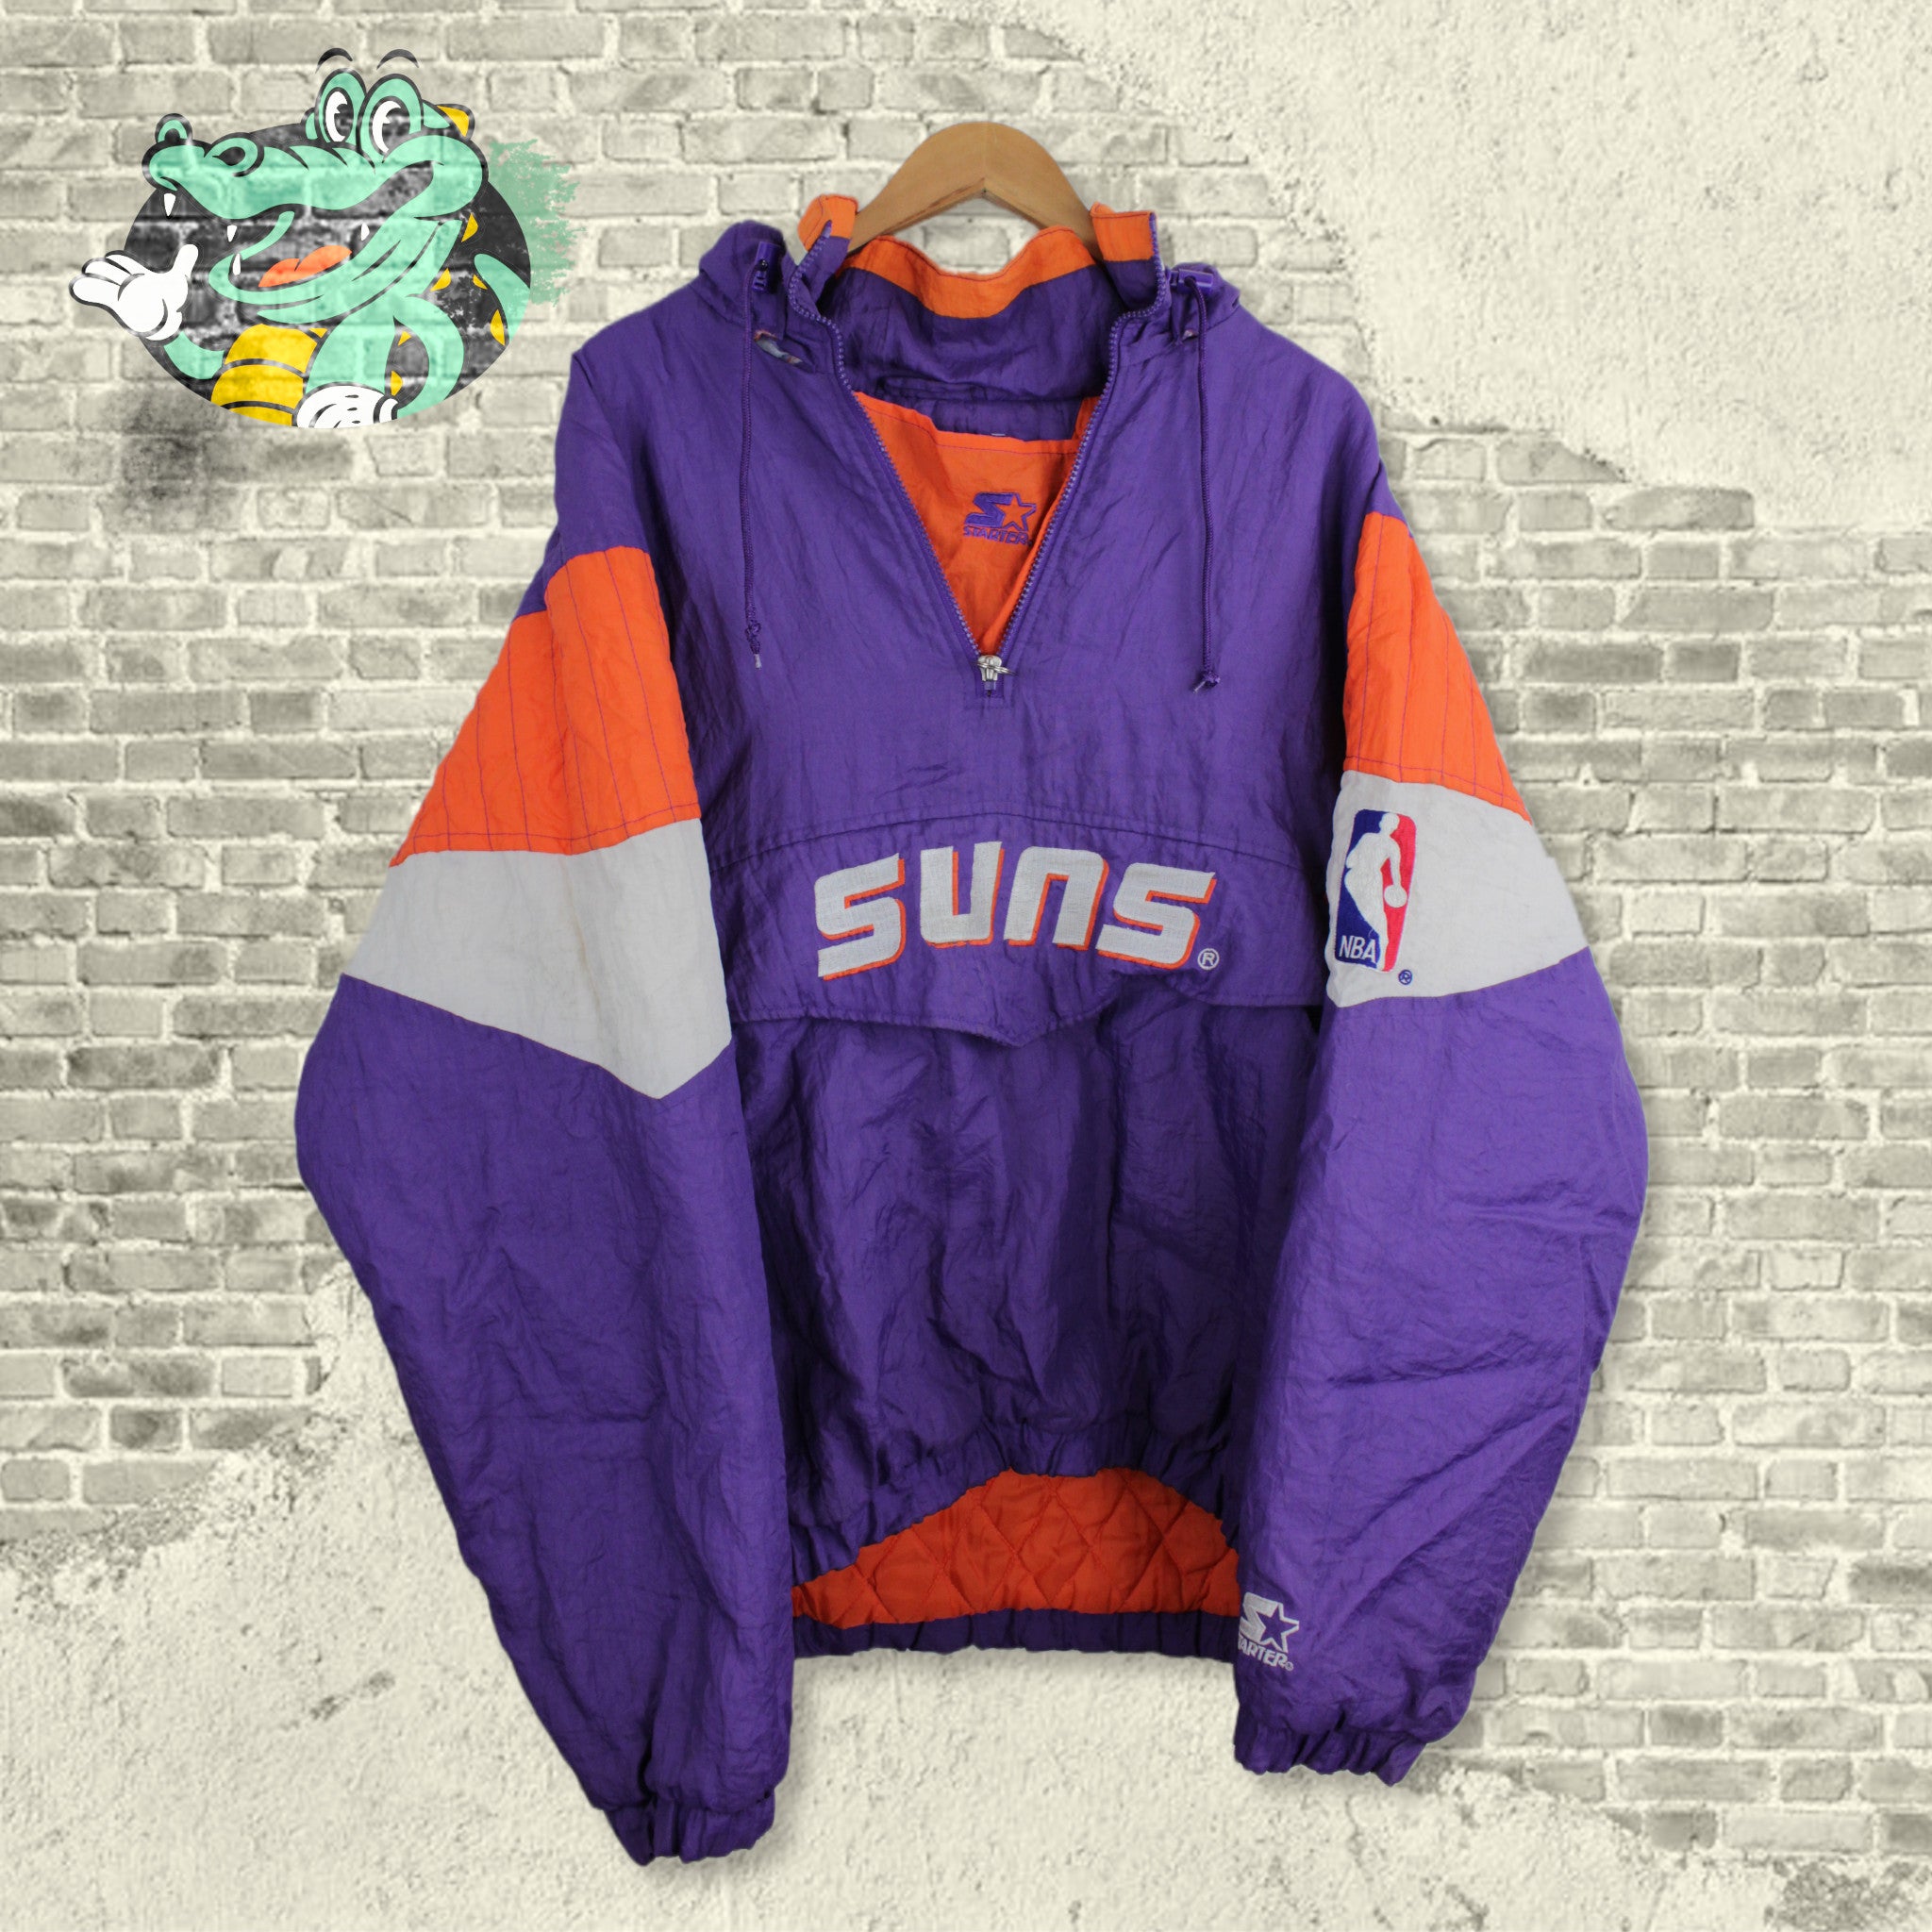 Vintage Phoenix Suns jacket I found for $7 . This was such a great